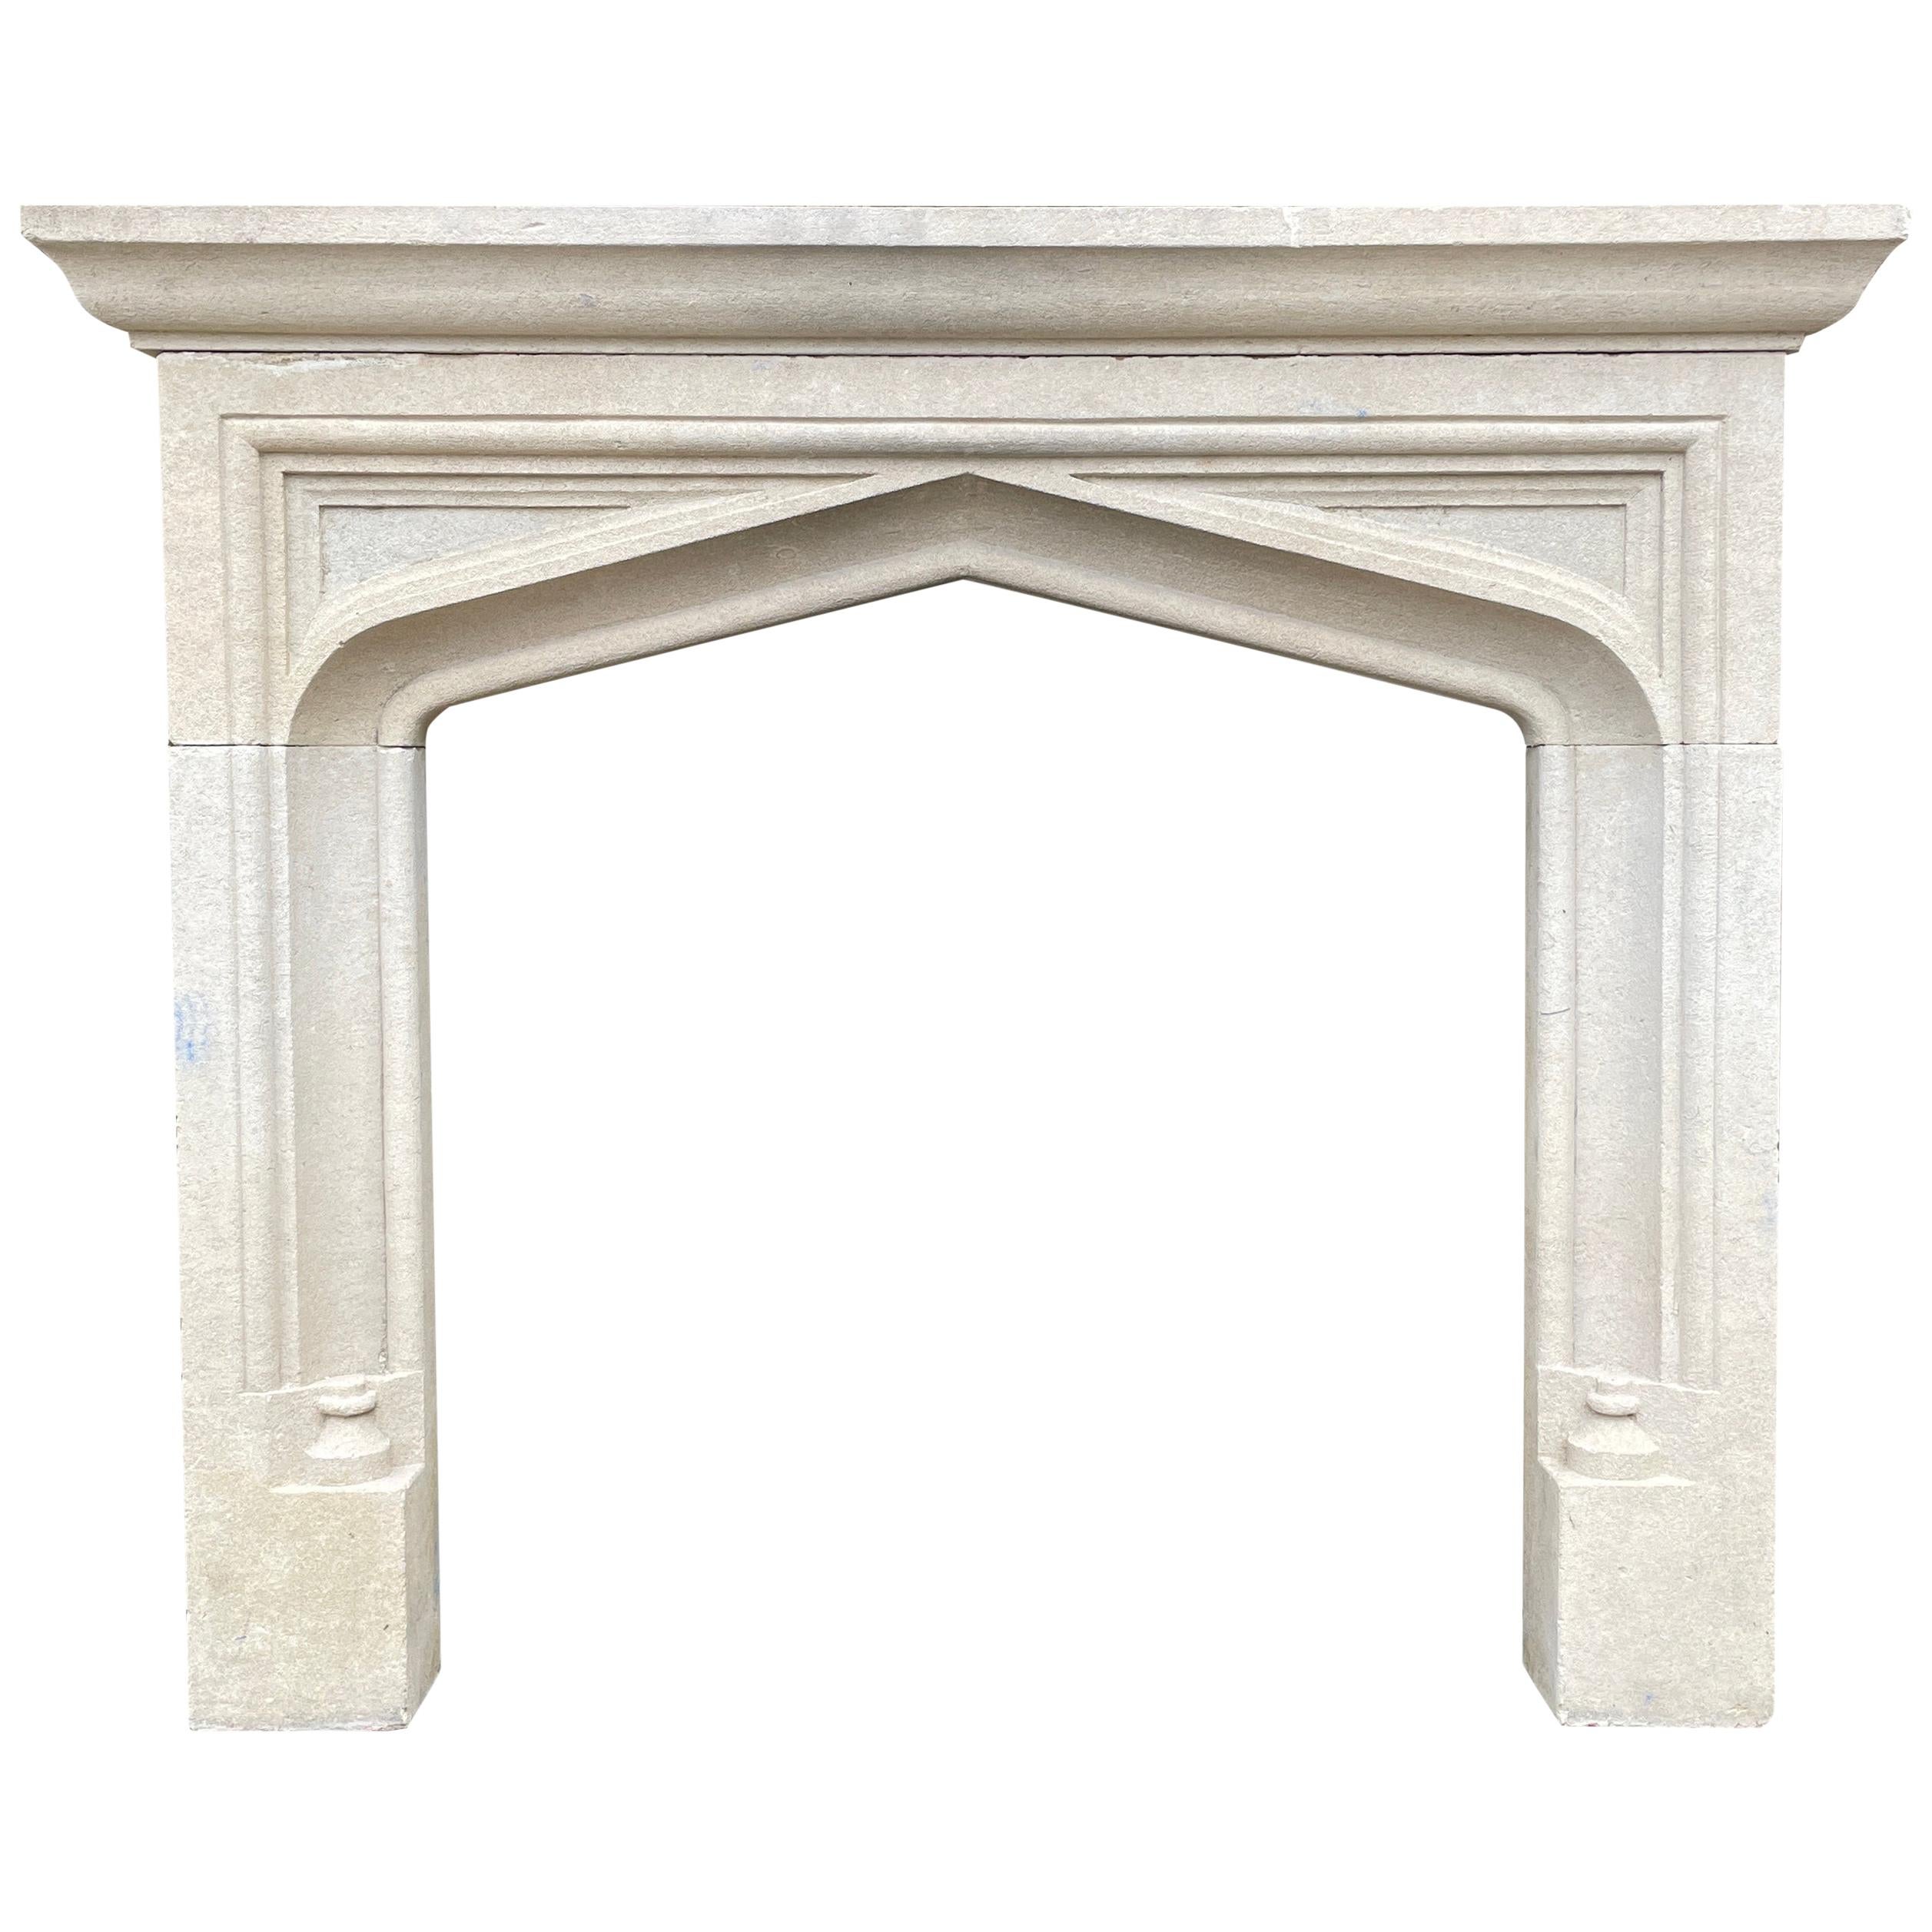 English Carved Bath Stone Fireplace Mantel in The Gothic Manner